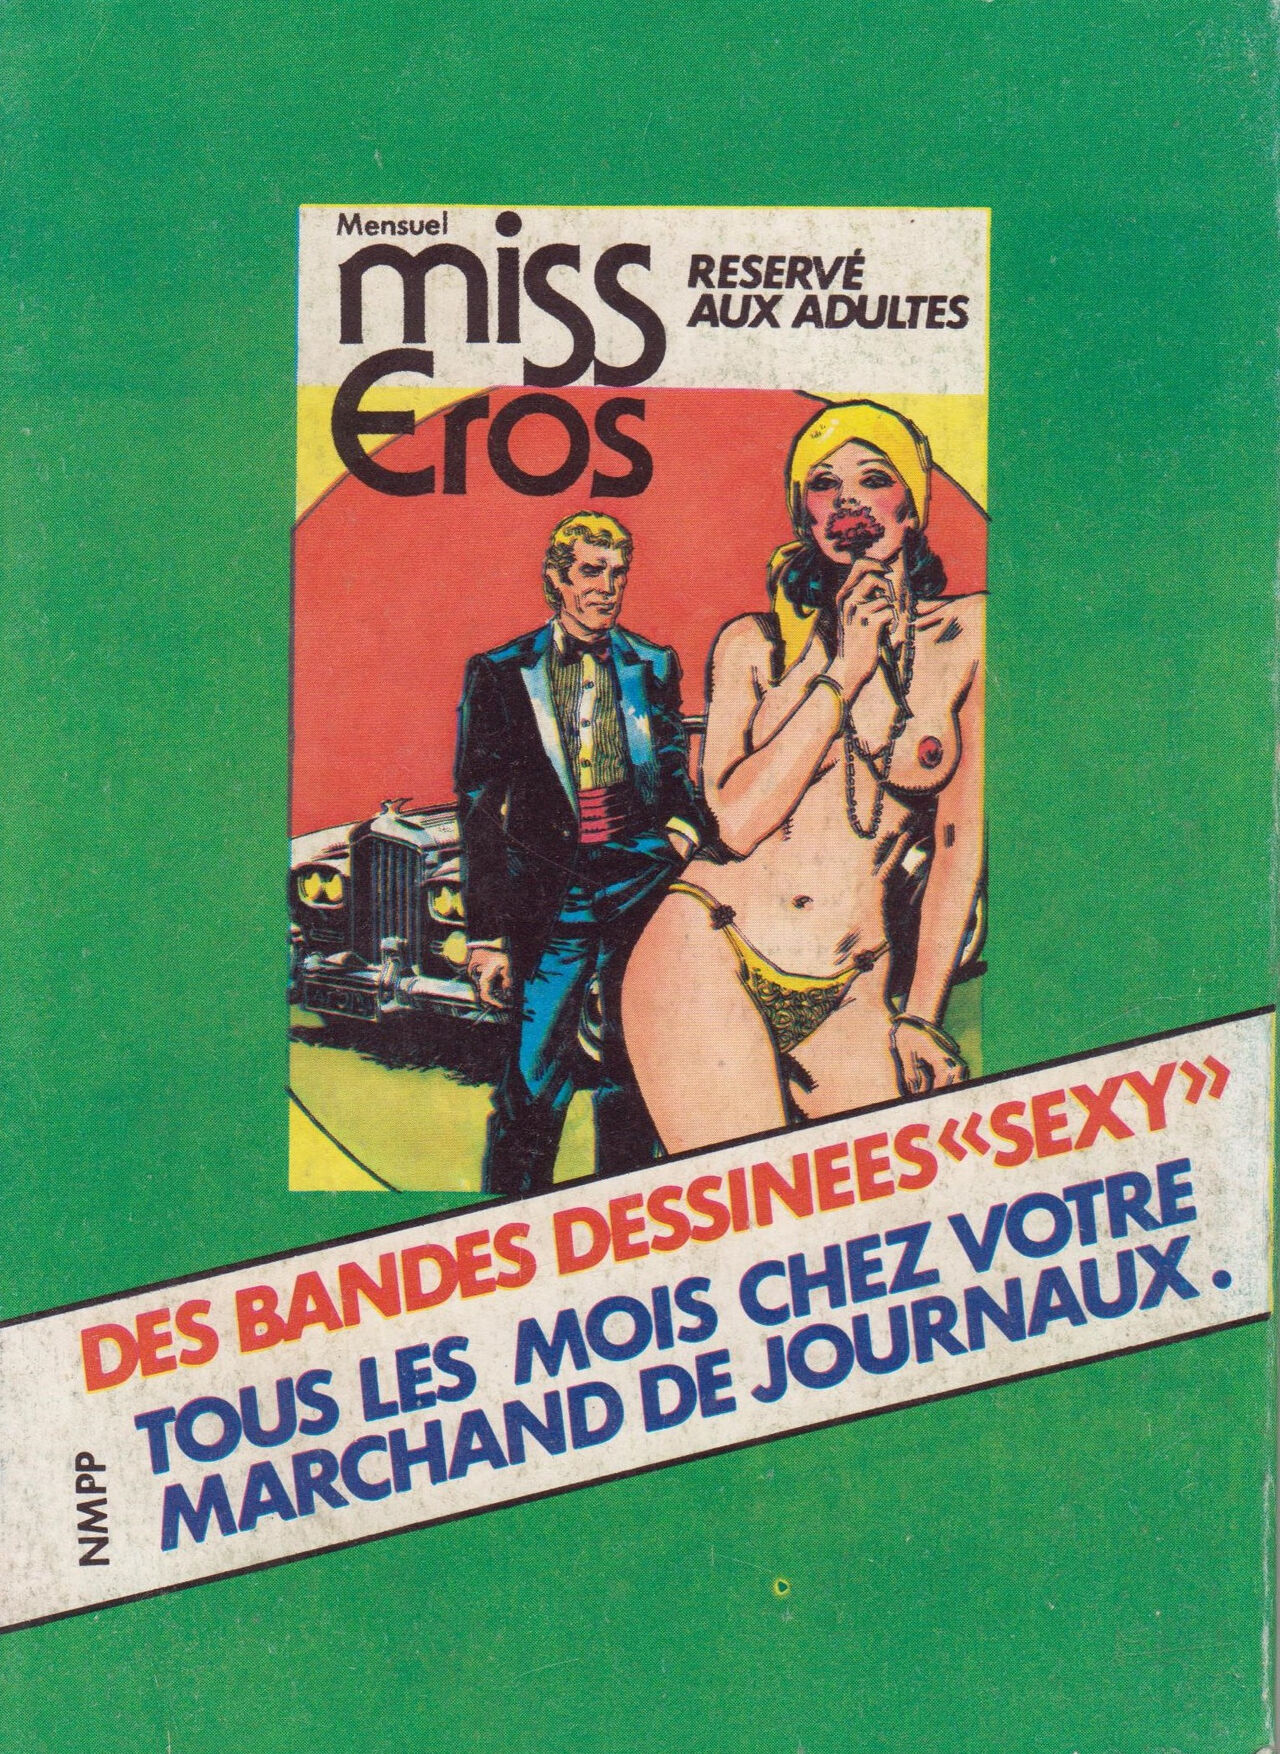 Hypersexy 14 - Lady Love : L’hypnotiseur + Chang : Mister X numero d'image 66